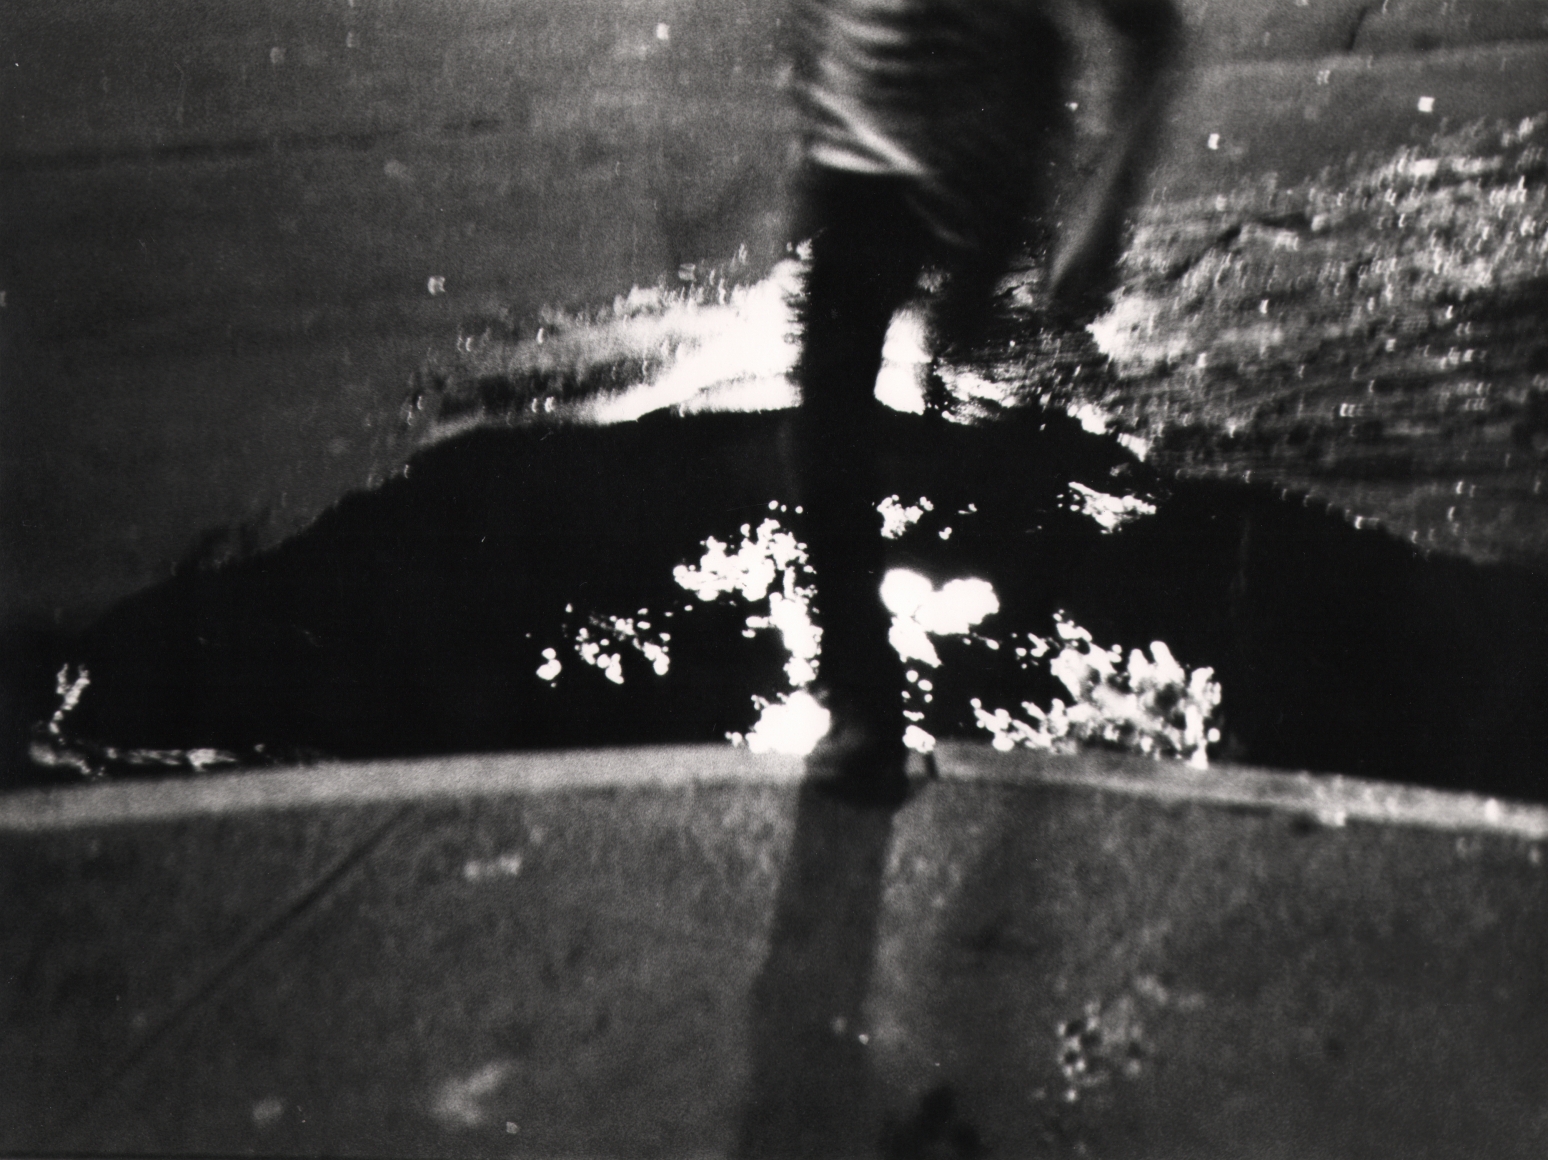 37. Beuford Smith, Untitled, ​c. 1970. Motion-blurred, dark image of the lower body of a boy jumping over a puddle.